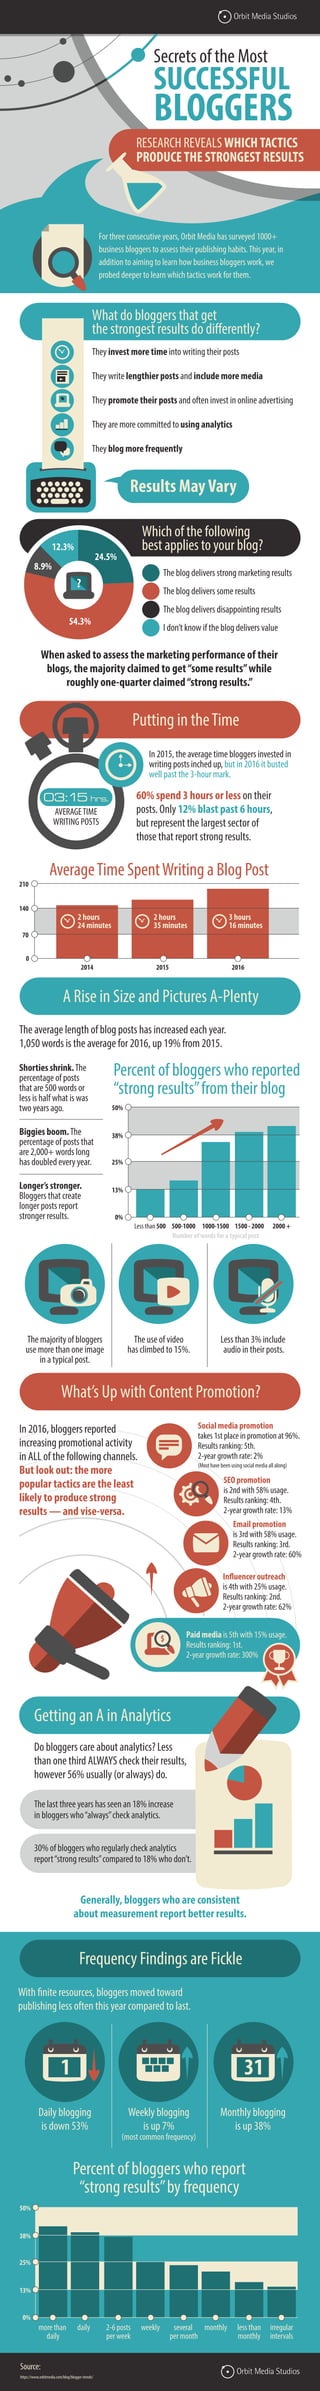 When asked to assess the marketing performance of their
blogs, the majority claimed to get“some results”while
roughly one-quarter claimed“strong results.”
In 2015, the average time bloggers invested in
writing posts inched up, but in 2016 it busted
well past the 3-hour mark.
60% spend 3 hours or less on their
posts. Only 12% blast past 6 hours,
but represent the largest sector of
those that report strong results.
Shorties shrink.The
percentage of posts
that are 500 words or
less is half what is was
two years ago.
Biggies boom.The
percentage of posts that
are 2,000+ words long
has doubled every year.
Longer’s stronger.
Bloggers that create
longer posts report
stronger results.
Social media promotion
takes 1st place in promotion at 96%.
Results ranking: 5th.
2-year growth rate: 2%
(Most have been using social media all along)
Influencer outreach
is 4th with 25% usage.
Results ranking: 2nd.
2-year growth rate: 62%
SEO promotion
is 2nd with 58% usage.
Results ranking: 4th.
2-year growth rate: 13%
Email promotion
is 3rd with 58% usage.
Results ranking: 3rd.
2-year growth rate: 60%
The majority of bloggers
use more than one image
in a typical post.
The use of video
has climbed to 15%.
Less than 3% include
audio in their posts.
The average length of blog posts has increased each year.
1,050 words is the average for 2016, up 19% from 2015.
In 2016, bloggers reported
increasing promotional activity
in ALL of the following channels.
But look out: the more
popular tactics are the least
likely to produce strong
results — and vise-versa.
With finite resources, bloggers moved toward
publishing less often this year compared to last.
Daily blogging
is down 53%
Weekly blogging
is up 7%
(most common frequency)
Monthly blogging
is up 38%
For three consecutive years, Orbit Media has surveyed 1000+
business bloggers to assess their publishing habits.This year, in
addition to aiming to learn how business bloggers work, we
probed deeper to learn which tactics work for them.
Putting in theTime
Which of the following
best applies to your blog?
A Rise in Size and Pictures A-Plenty
What’s Up with Content Promotion?
Frequency Findings are Fickle
The blog delivers strong marketing results
The blog delivers some results
The blog delivers disappointing results
I don’t know if the blog delivers value
0%
13%
25%
38%
50%
Less than 500 500-1000
Number of words for a typical post
1000-1500 1500 - 2000 2000 +
0%
13%
25%
38%
50%
more than
daily
2-6 posts
per week
monthly less than
monthly
irregular
intervals
weekly several
per month
daily
0
70
140
210
2014
2 hours
24 minutes
2 hours
35 minutes
3 hours
16 minutes
2015 2016
Secrets of the Most
SUCCESSFUL
BLOGGERS
RESEARCH REVEALSWHICHTACTICS
PRODUCETHE STRONGEST RESULTS
24.5%
54.3%
8.9%
12.3%
?
Percent of bloggers who reported
“strong results”from their blog
What do bloggers that get
the strongest results do differently?
They invest more time into writing their posts
They write lengthier posts and include more media
They promote their posts and often invest in online advertising
They are more committed to using analytics
They blog more frequently
Results MayVary
Source:
https://www.orbitmedia.com/blog/blogger-trends/
AverageTime SpentWriting a Blog Post
1 31
Percent of bloggers who report
“strong results”by frequency
Do bloggers care about analytics? Less
than one third ALWAYS check their results,
however 56% usually (or always) do.
The last three years has seen an 18% increase
in bloggers who“always”check analytics.
30% of bloggers who regularly check analytics
report“strong results”compared to 18% who don’t.
Generally, bloggers who are consistent
about measurement report better results.
Getting an A in Analytics
03:15 hrs.
AVERAGETIME
WRITING POSTS
Paid media is 5th with 15% usage.
Results ranking: 1st.
2-year growth rate: 300%
 